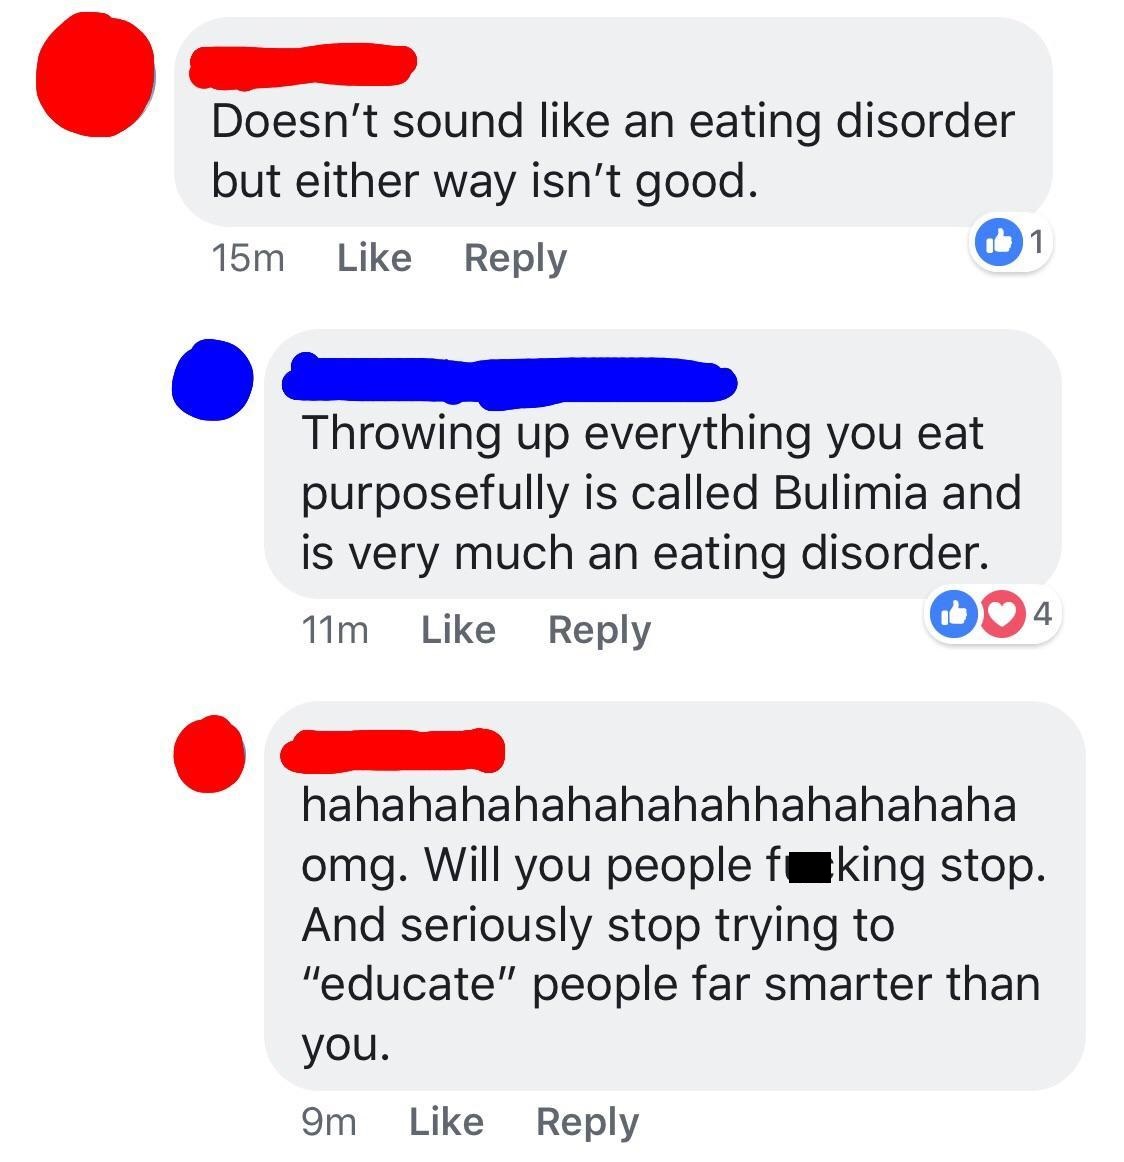 web page - Doesn't sound an eating disorder but either way isn't good. 15m Throwing up everything you eat purposefully is called Bulimia and is very much an eating disorder. 11m 004 hahahahahahahahahhahahahaha omg. Will you people feking stop. And serious